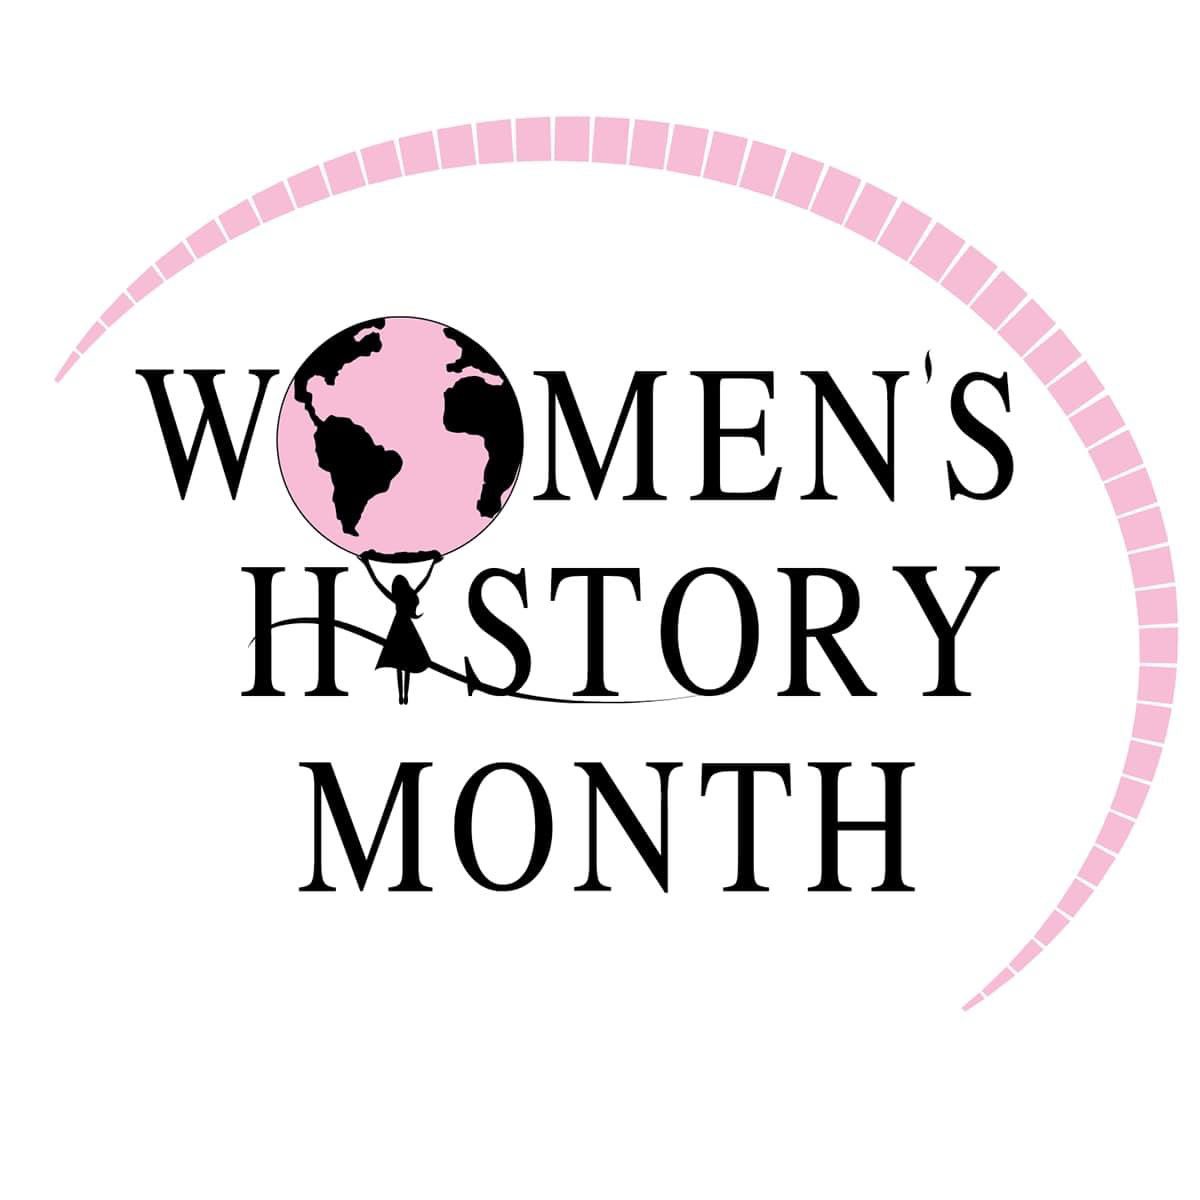 In honor of Women’s History Month, we thought we would share some of our well woman care.
*Well Woman Exam – Pap Smears and Breast Health
*Contraception
*Colposcopy (for abnormal Pap Smears)
*Menopause #familyphysician #agehealthier #livehappier #March #womenshistorymonth #women